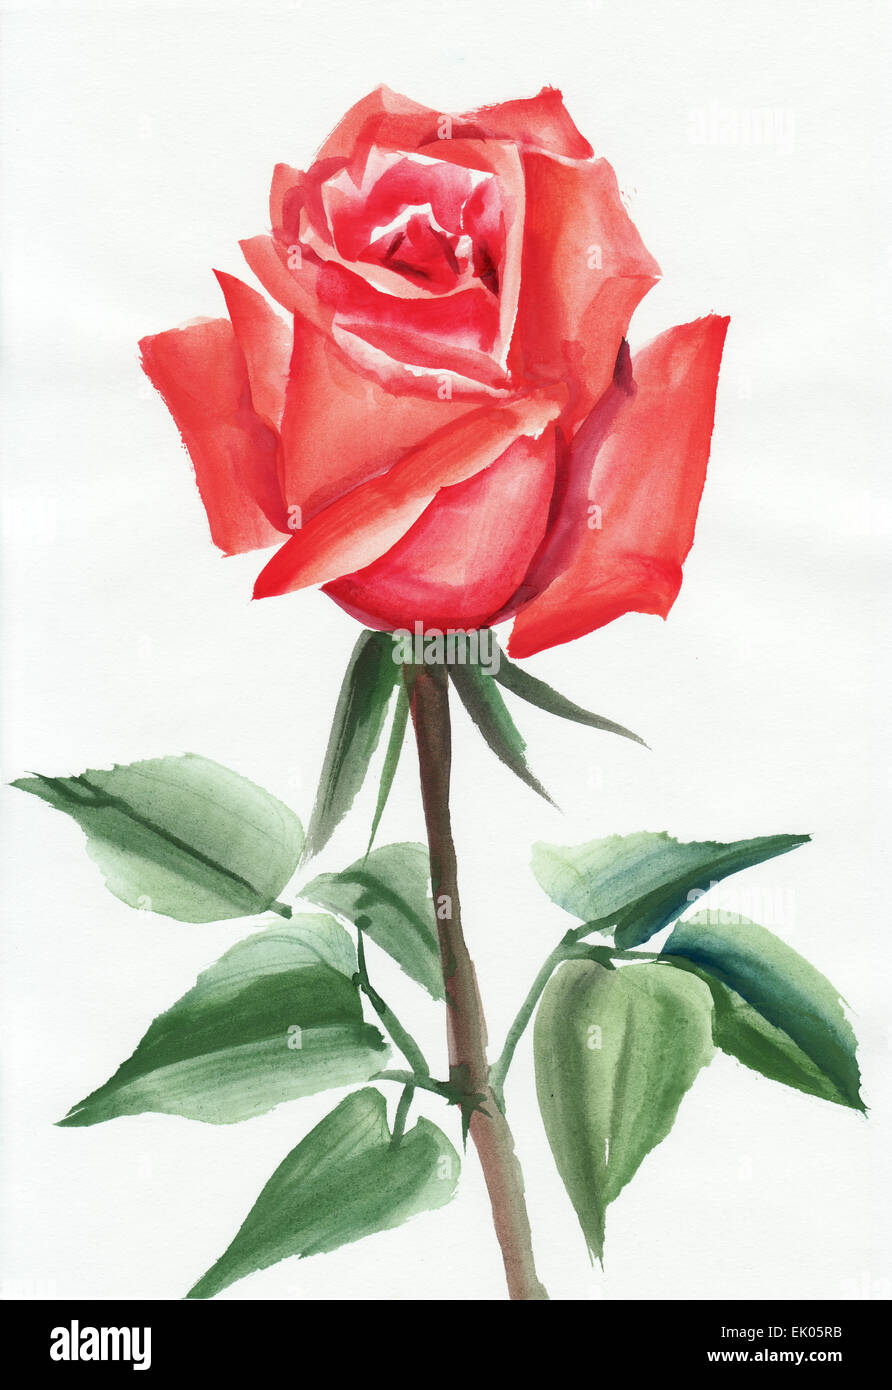 Red rose original watercolor painting on white background Stock Photo ...